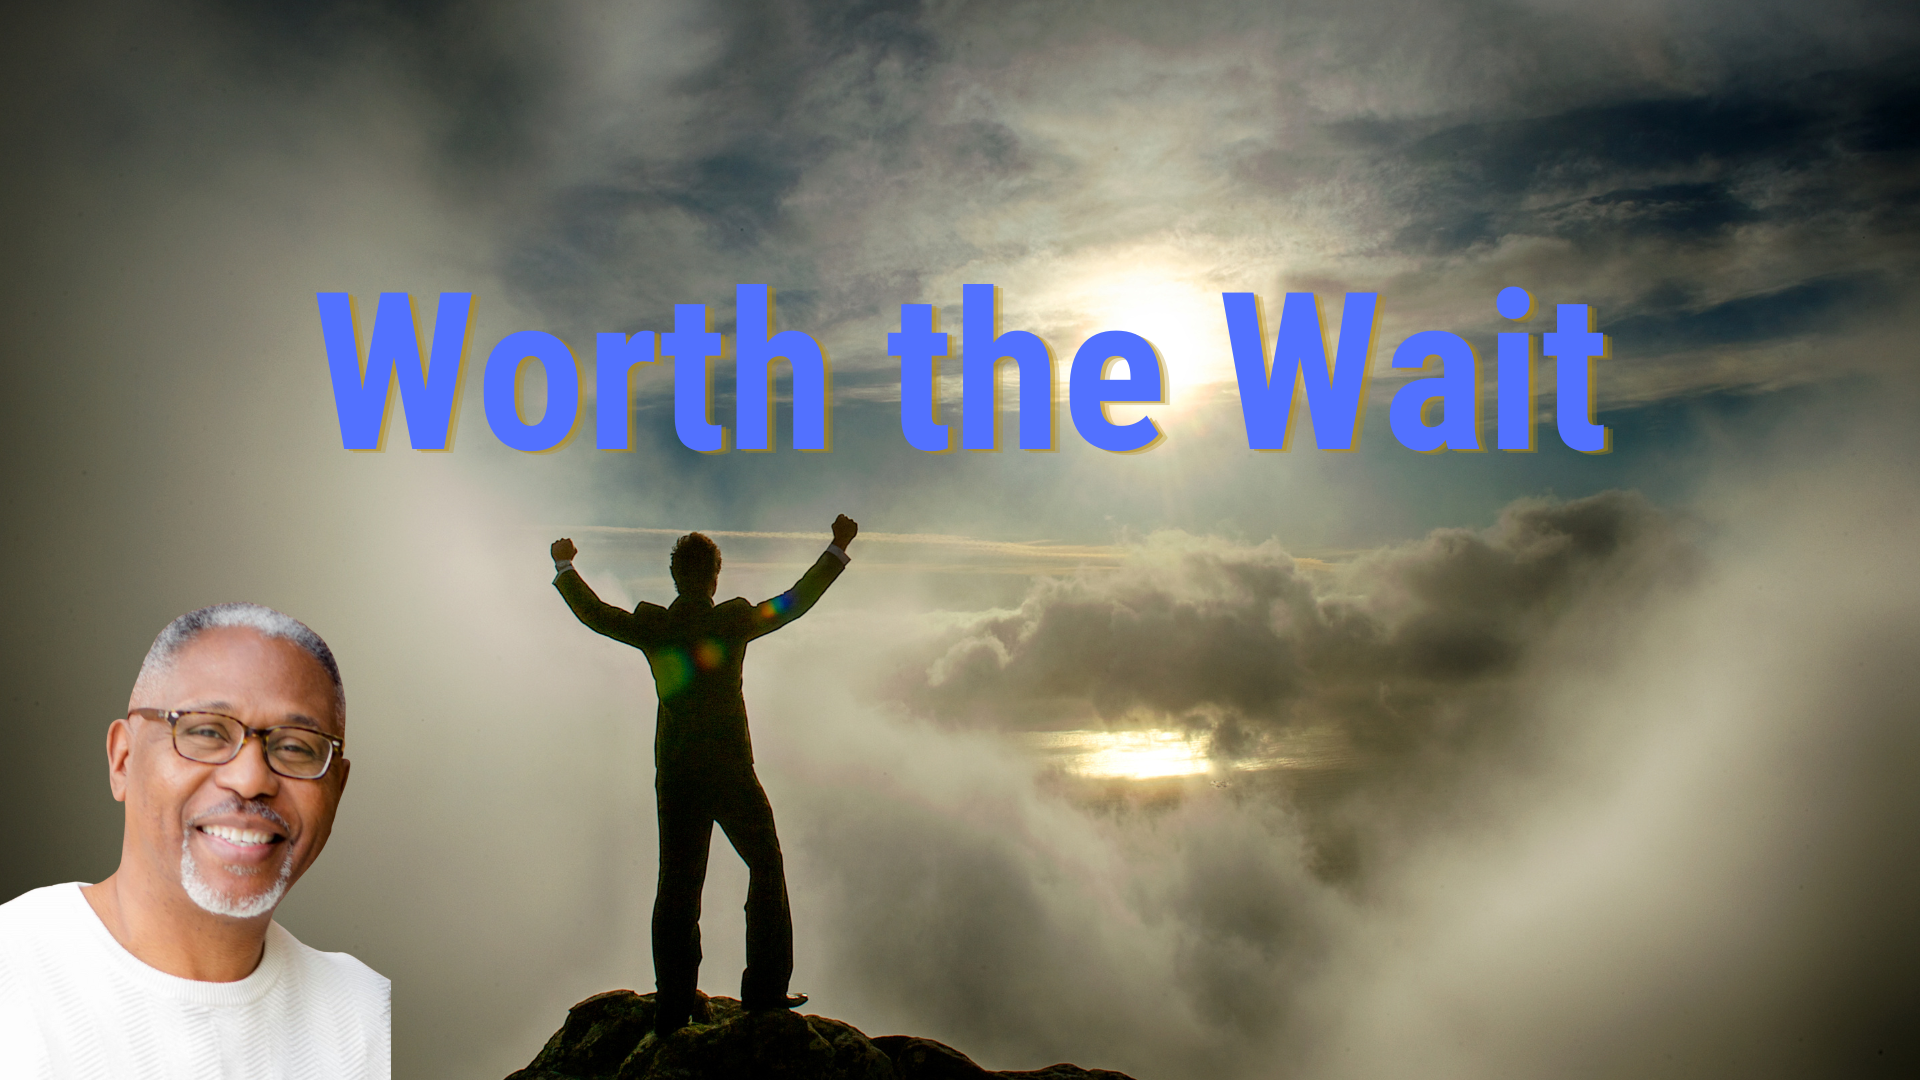 Worth the Wait blog featured image